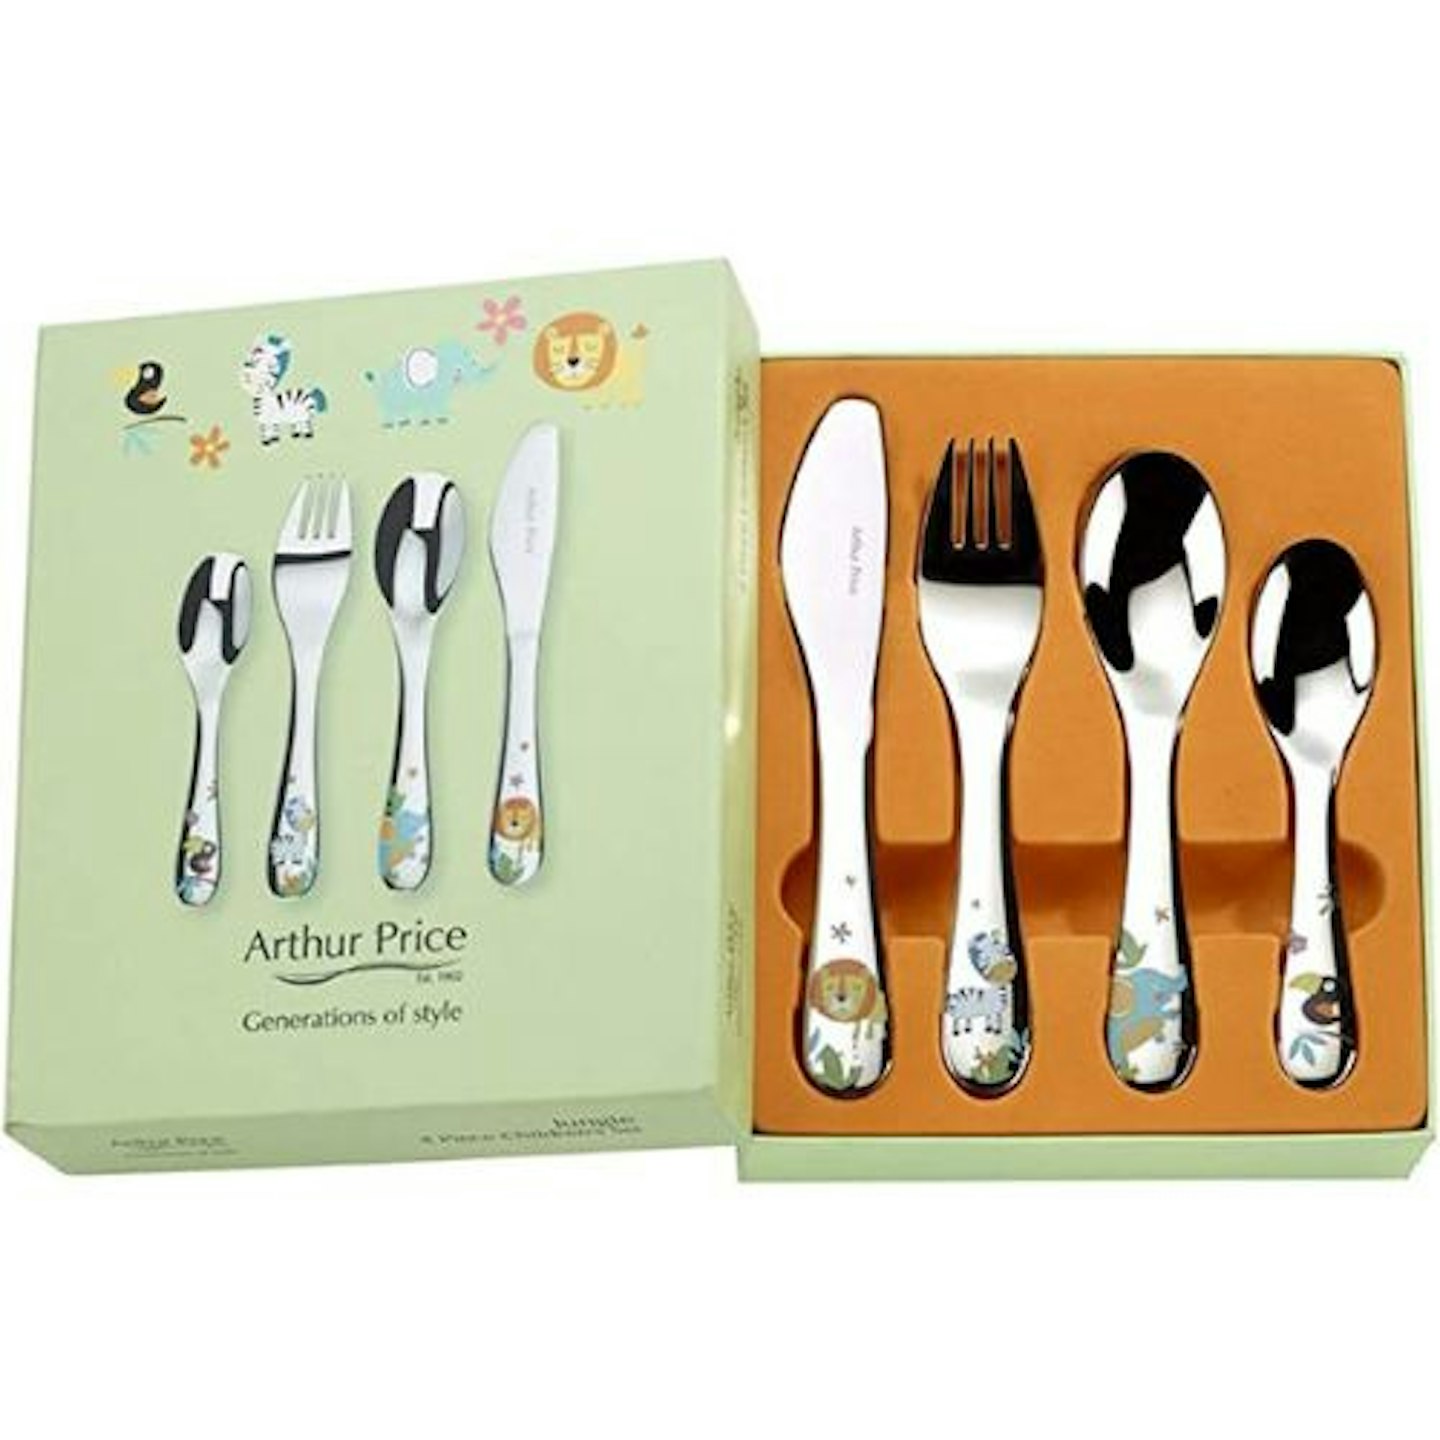 4 Pieces Toddler Utensils Stainless Steel Baby Forks and Spoons Silverware  Set K